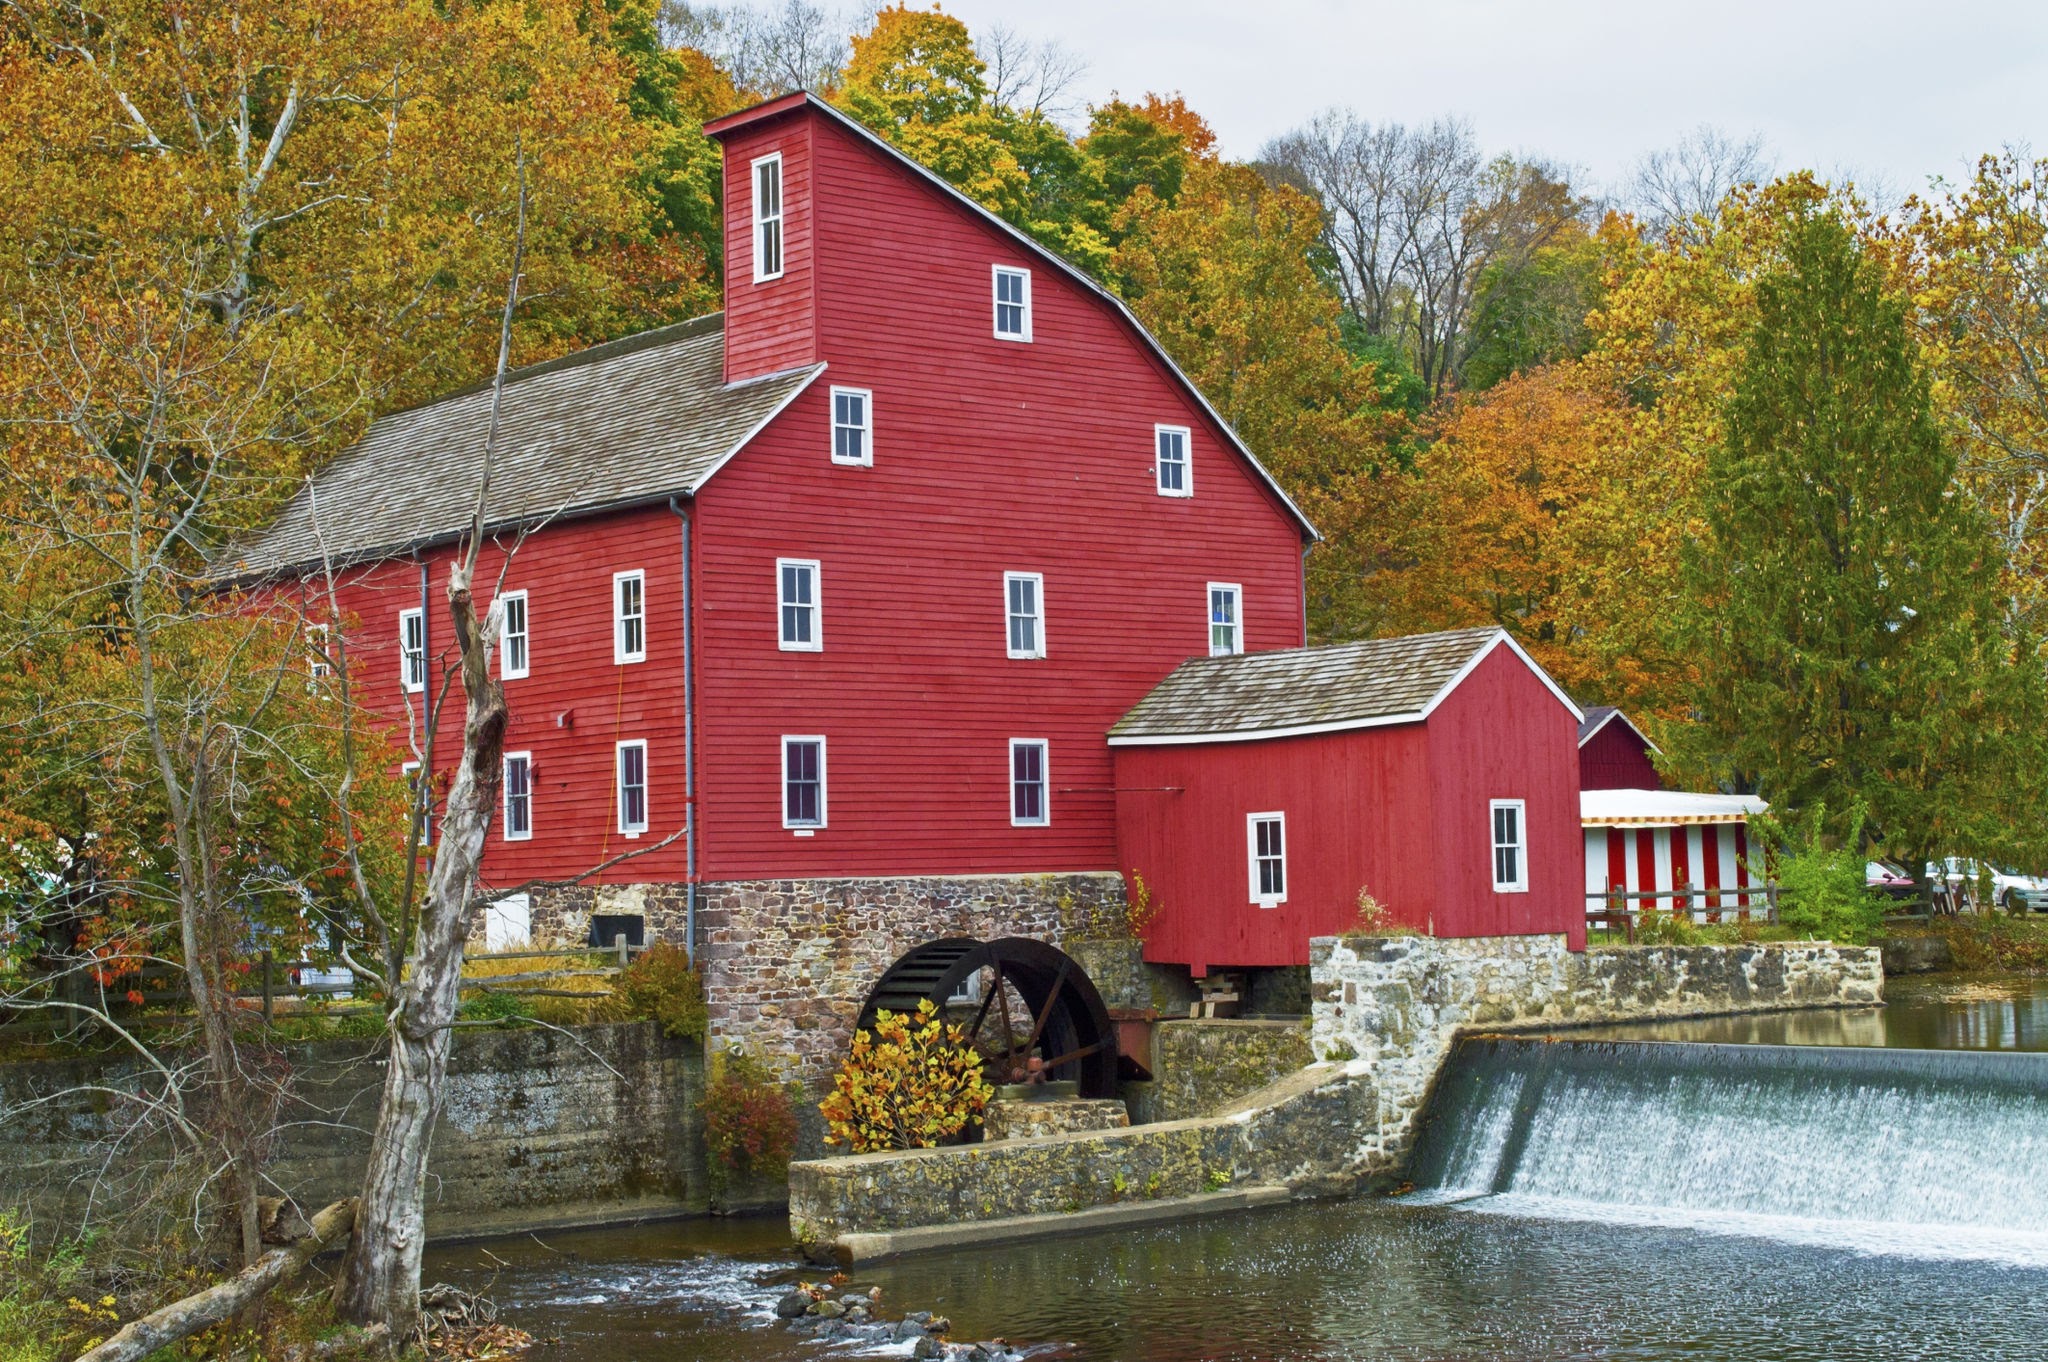 The historic Red Mill in Clinton Township in New Jersey.